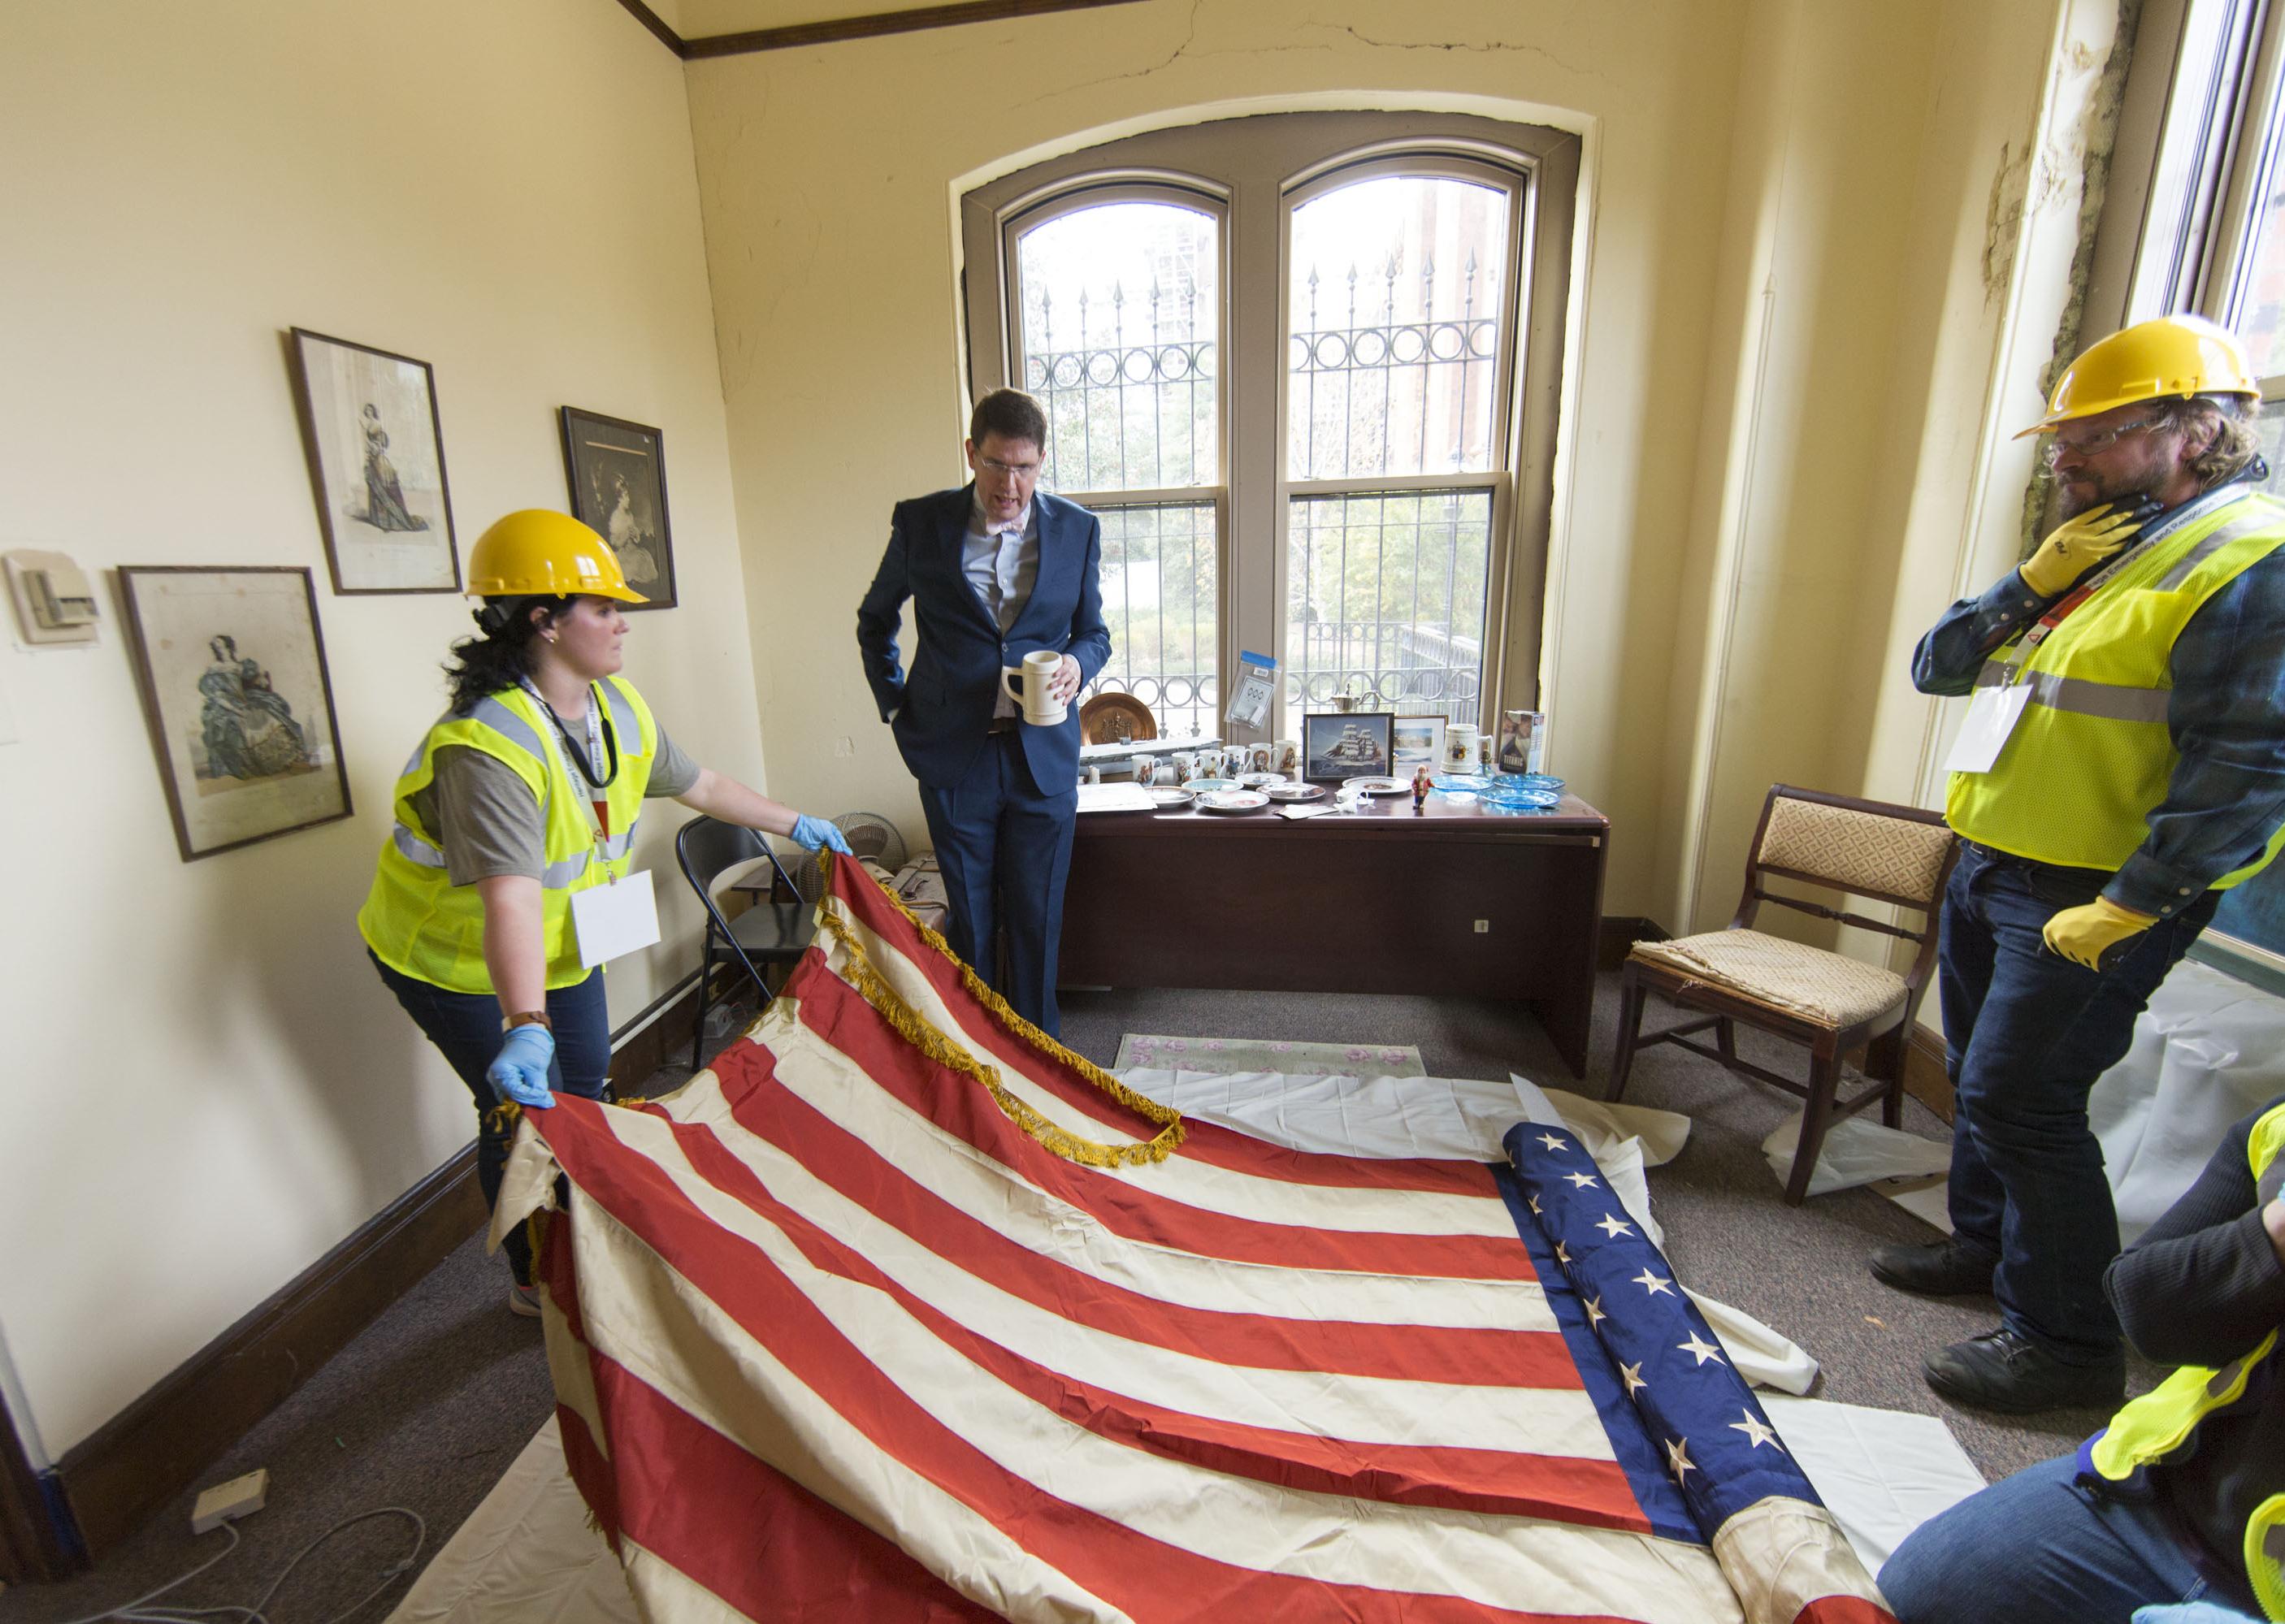 Two Heritage Emergency and Response Training participants in yellow vests and hardhats handle an American flag while a man in a suit looks